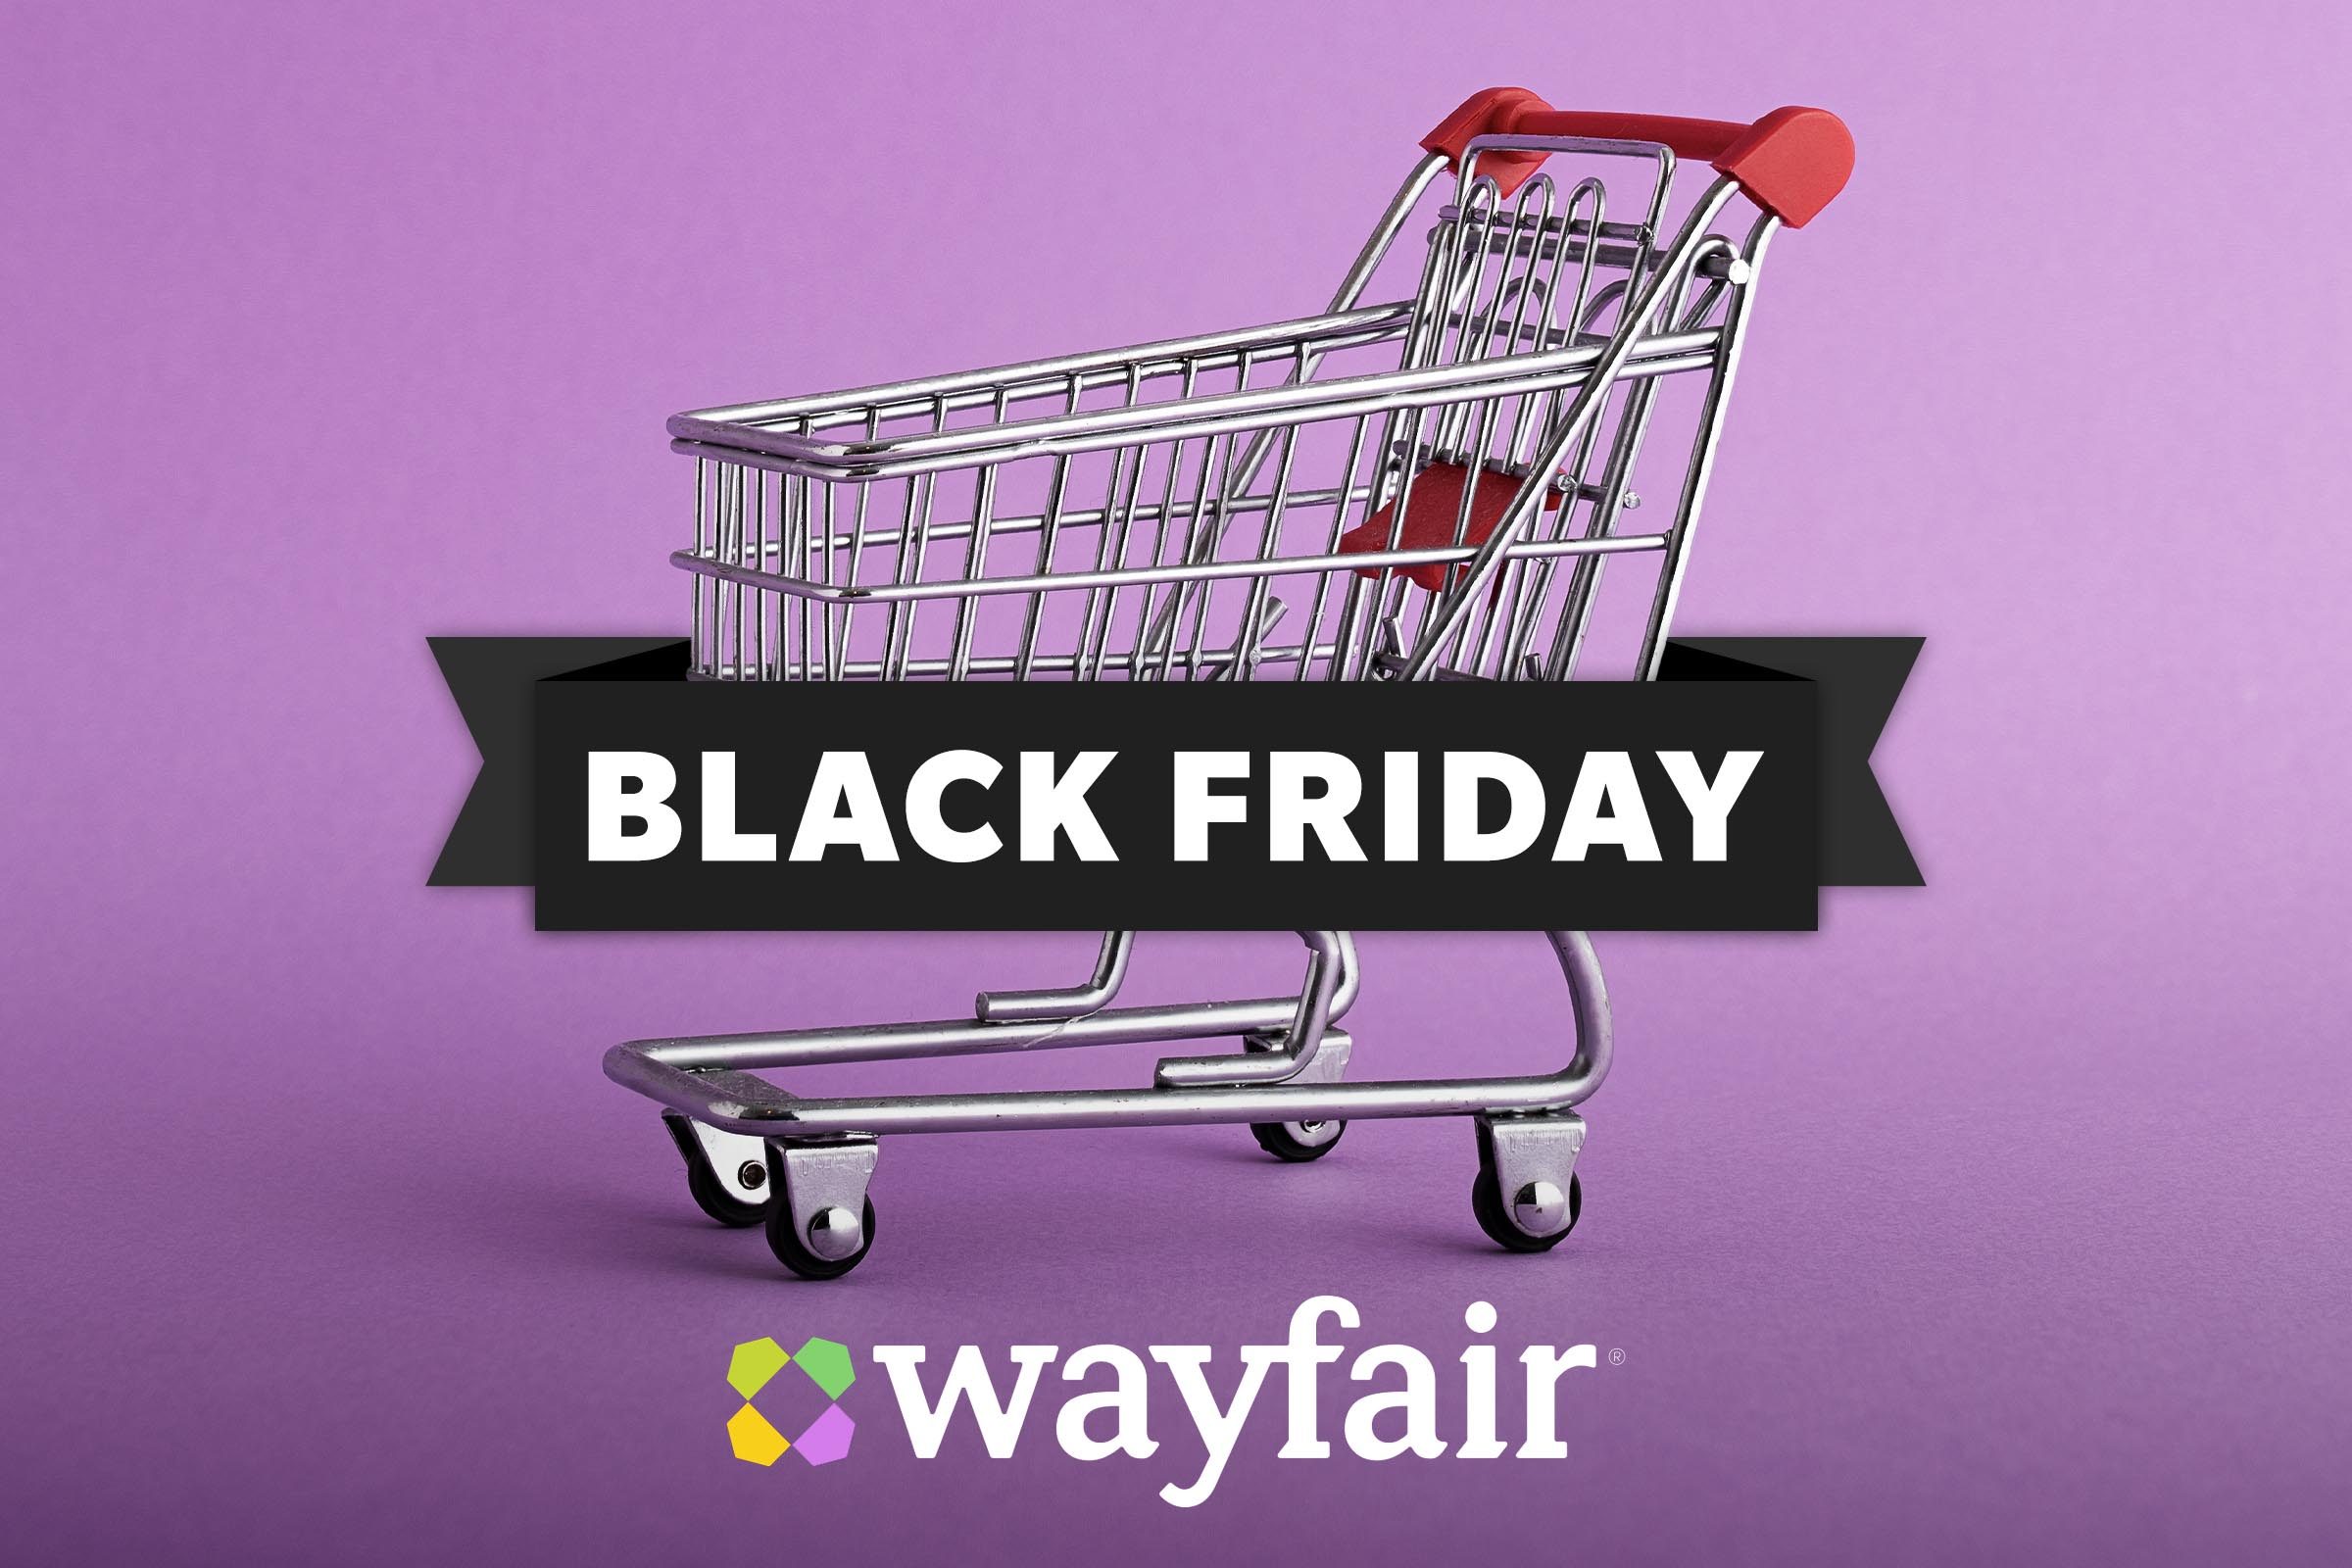 The Best Wayfair Black Friday Deals To Shop for 2022